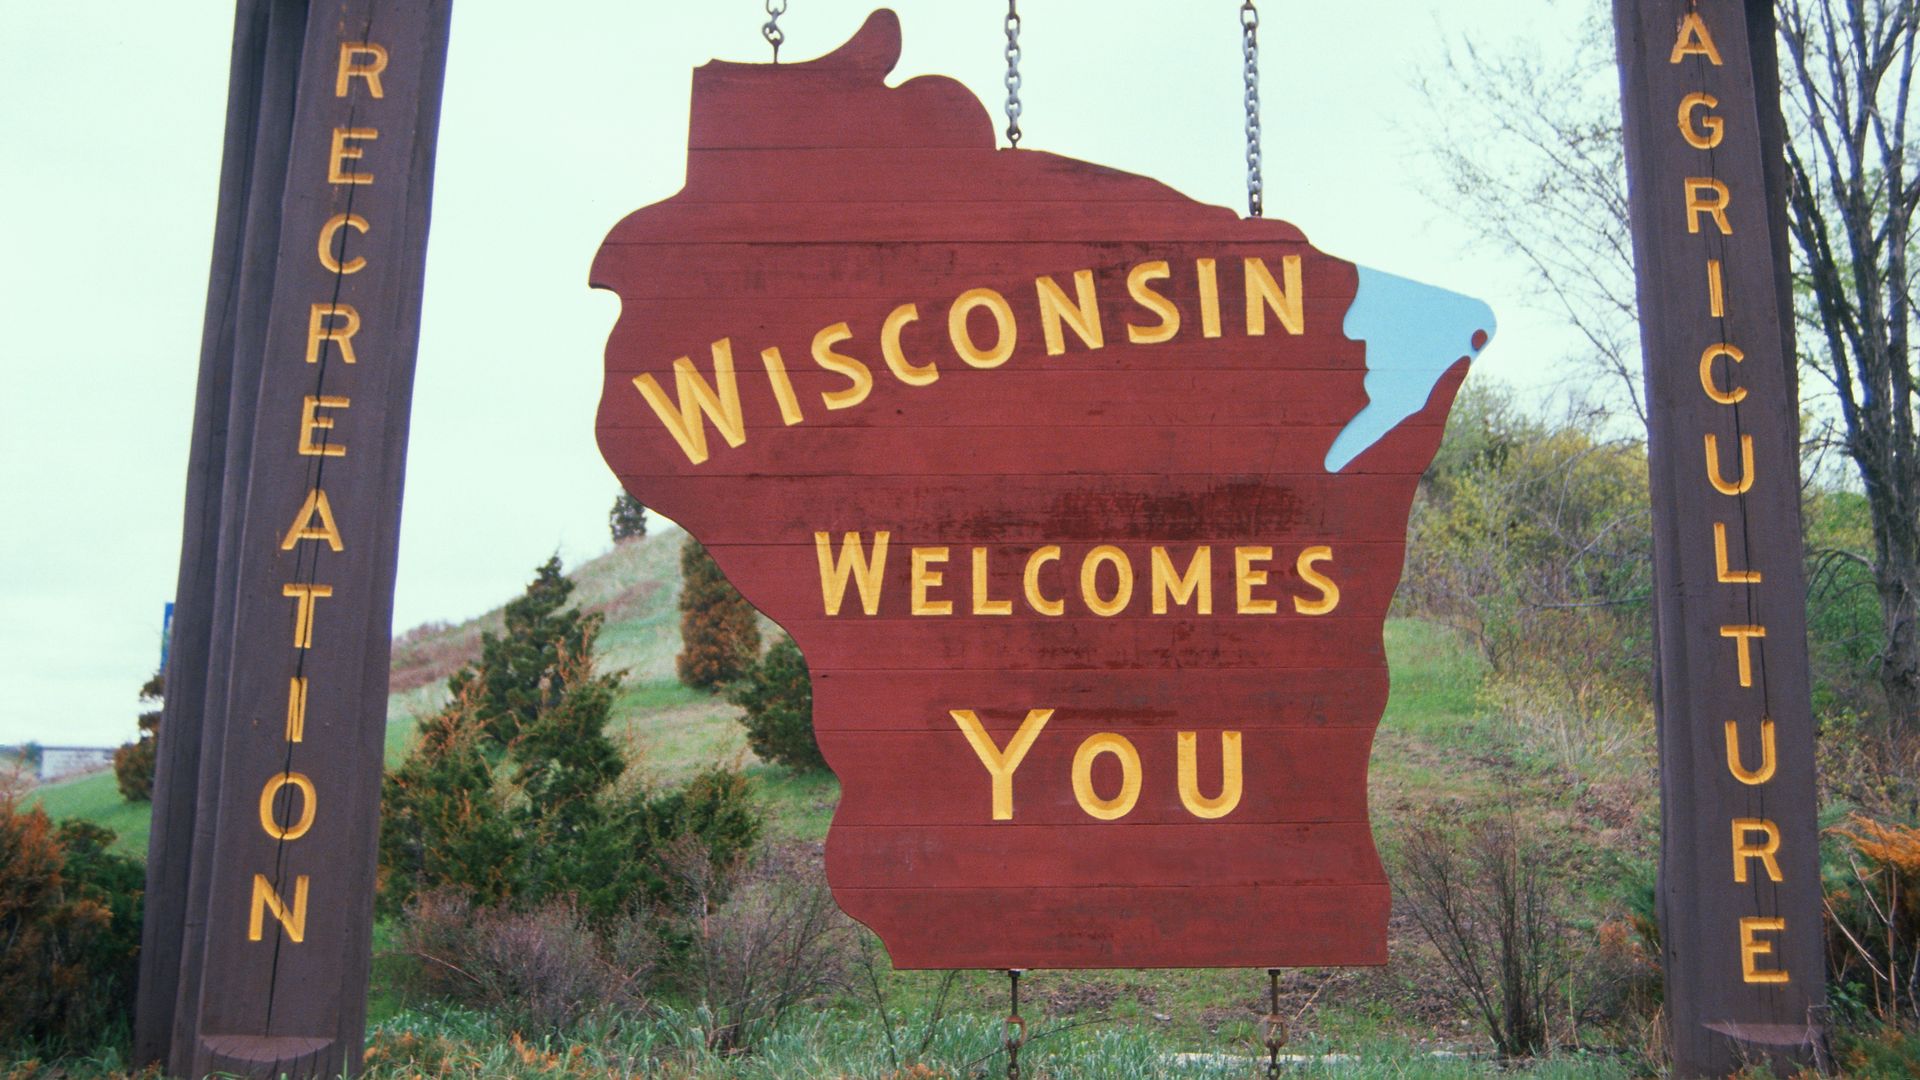 A welcome to Wisconsin sign